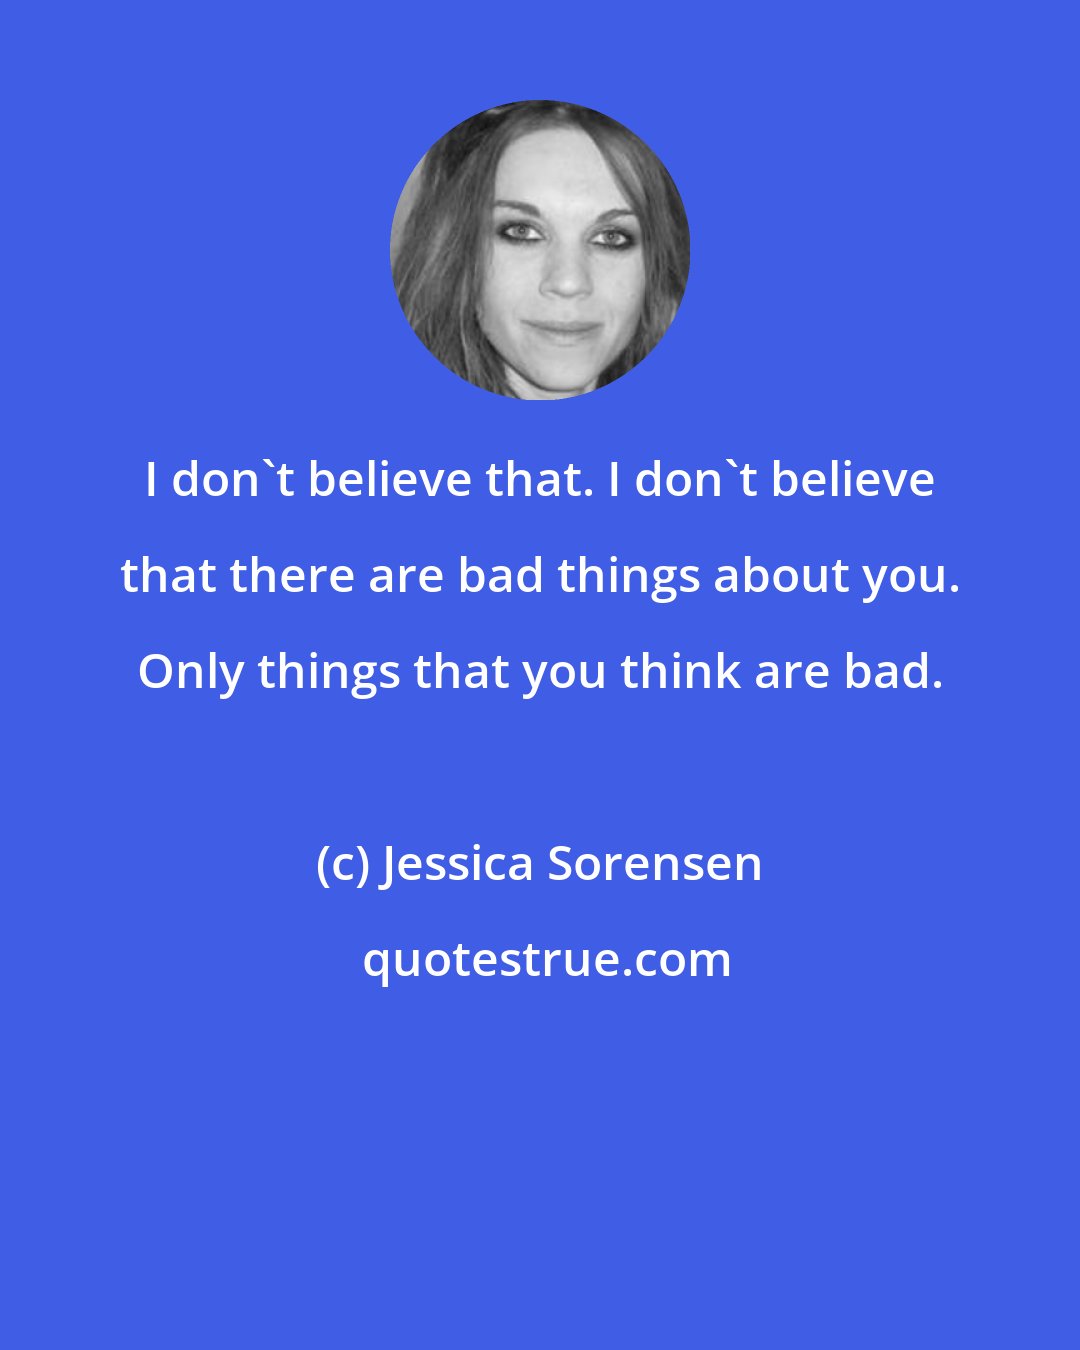 Jessica Sorensen: I don't believe that. I don't believe that there are bad things about you. Only things that you think are bad.